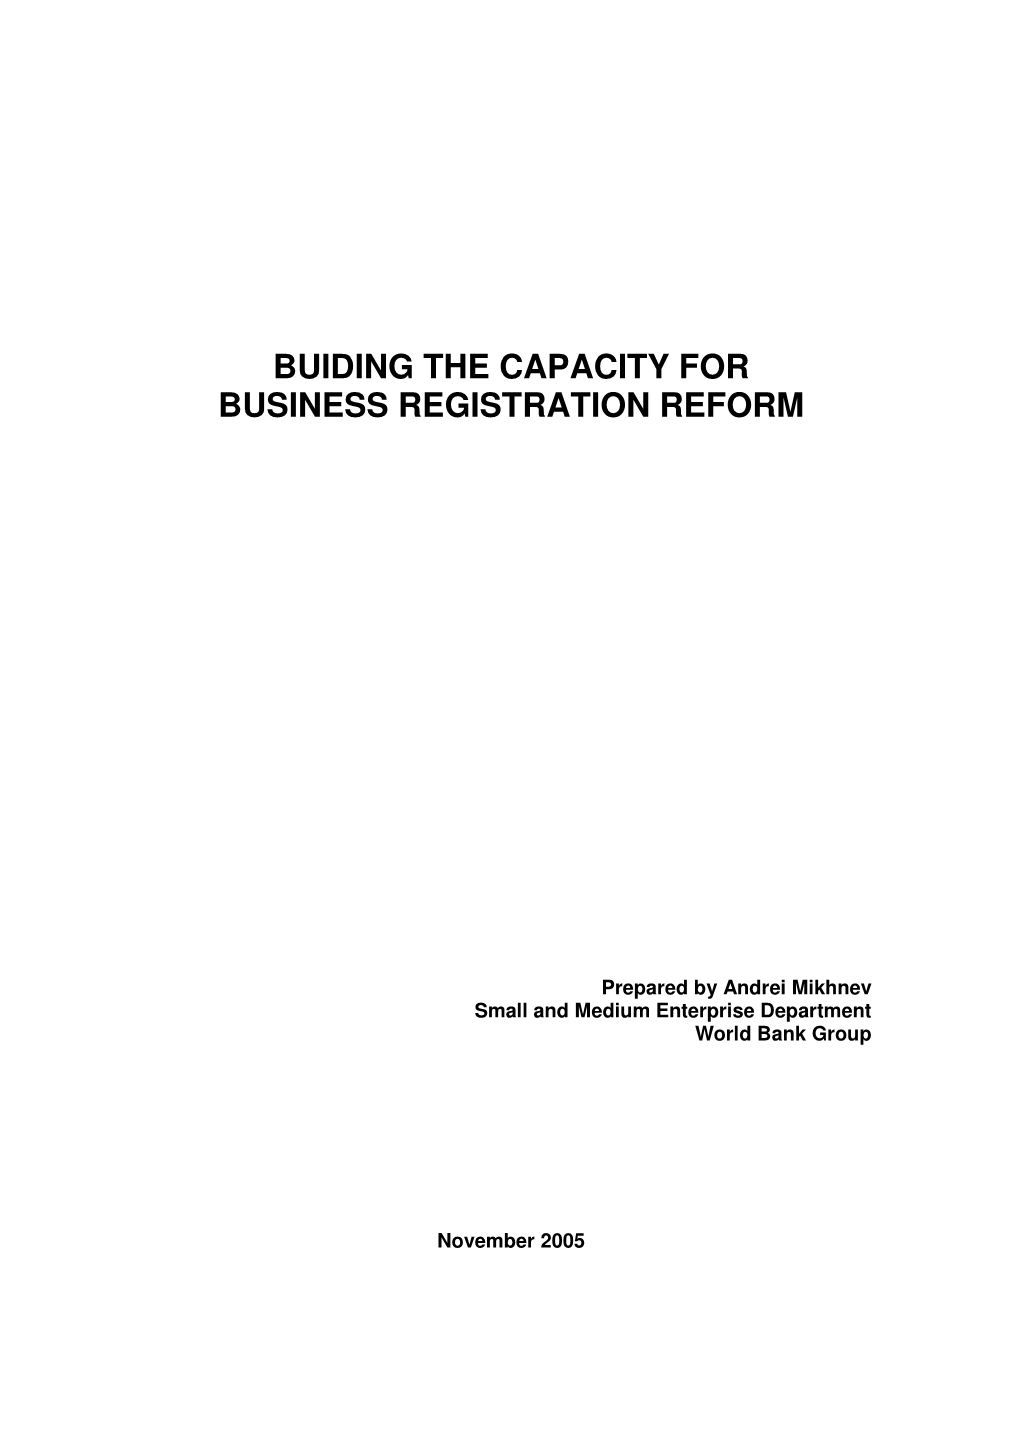 Building the Capacity for Business Registration Reform, by Andrei